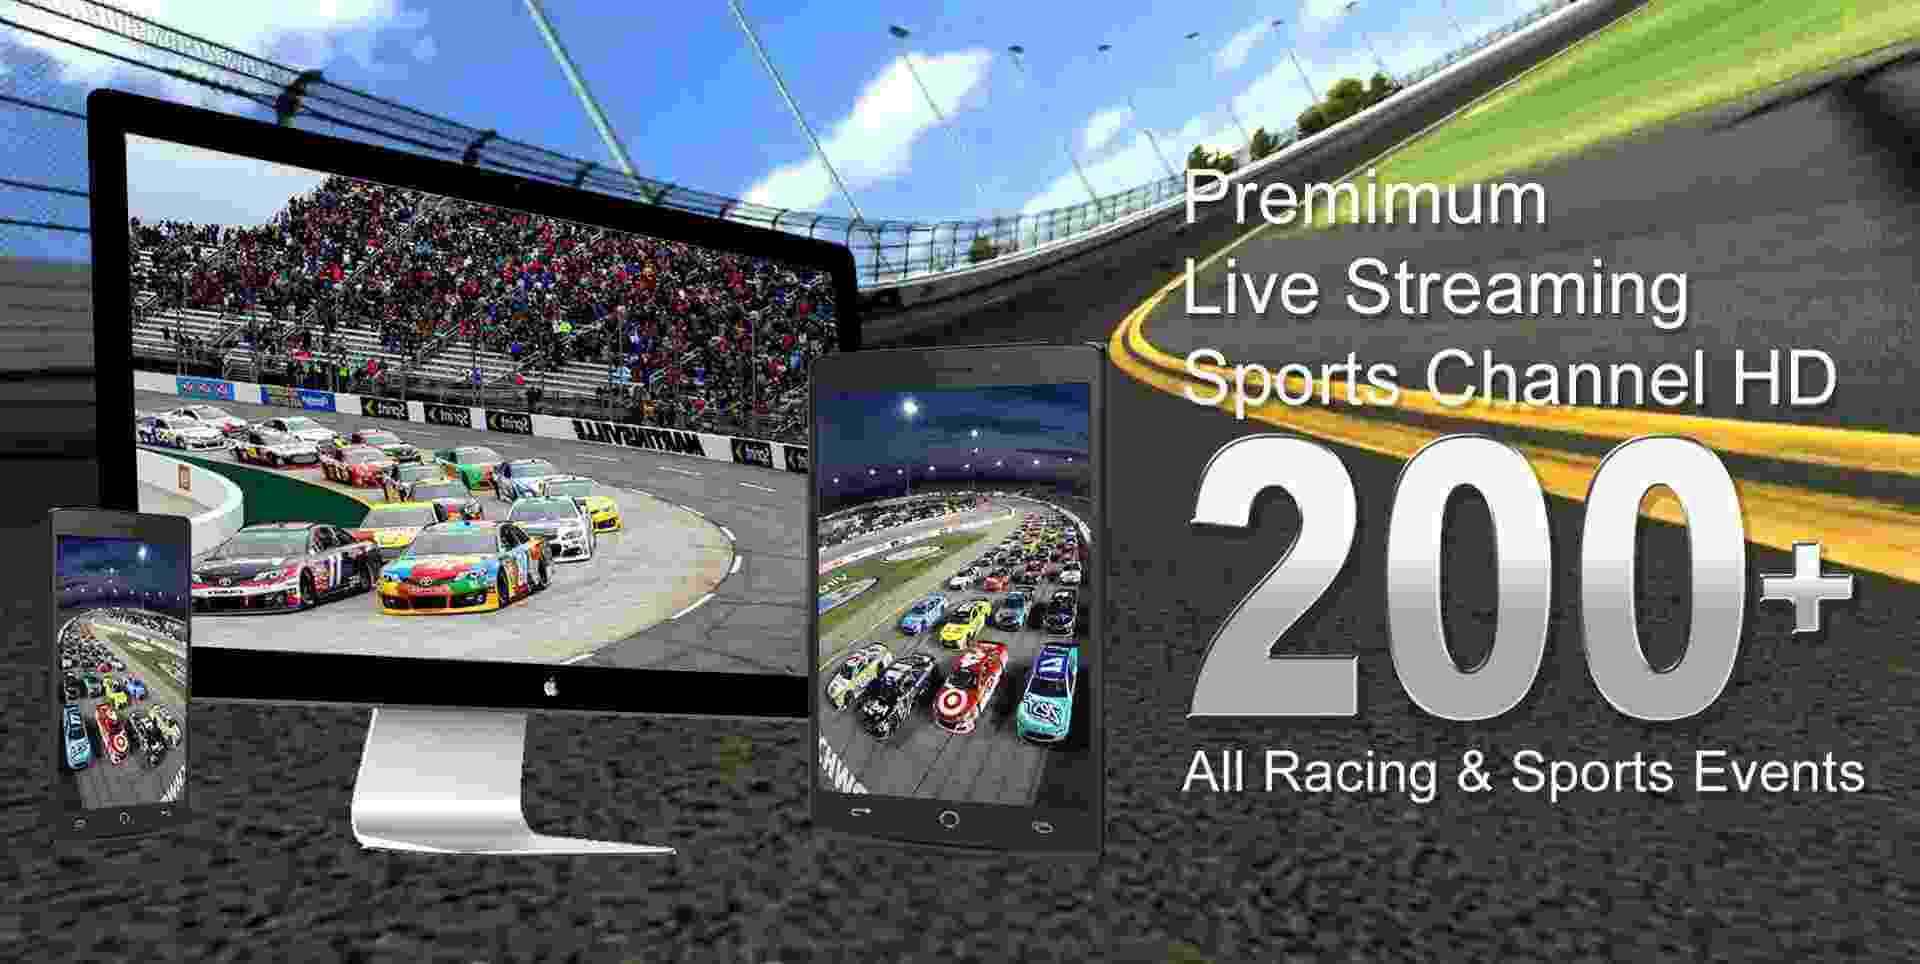 Menards 200 presented by Federated Car Care